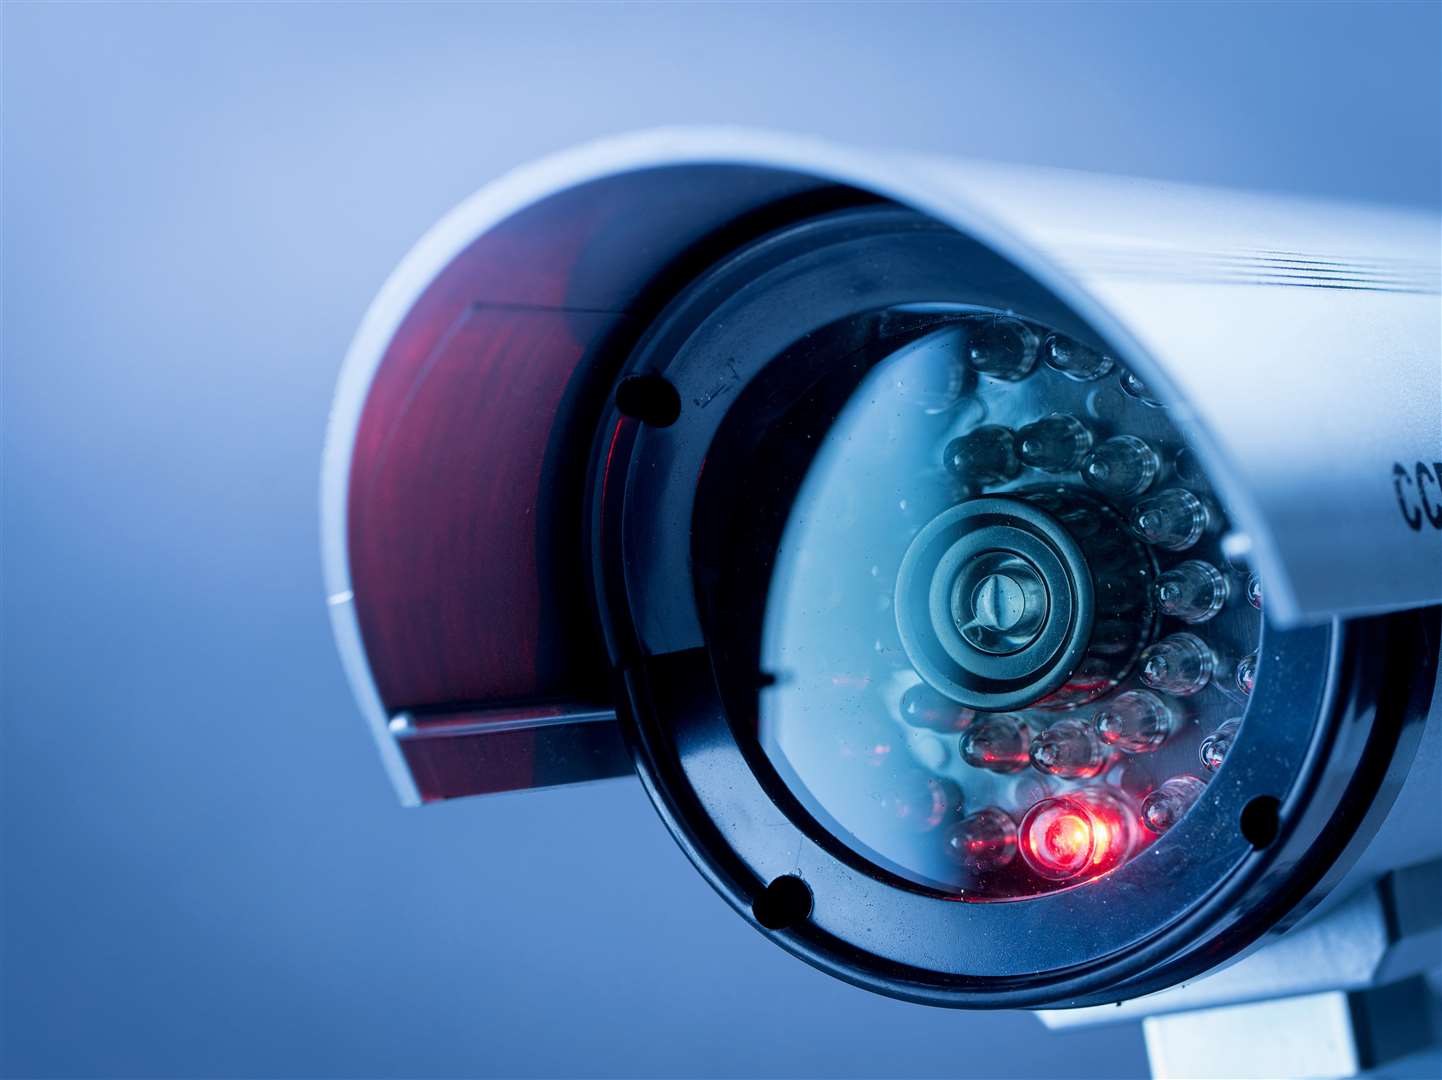 CCTV cameras are taking the place of police, says one correspondent. Picture: istock